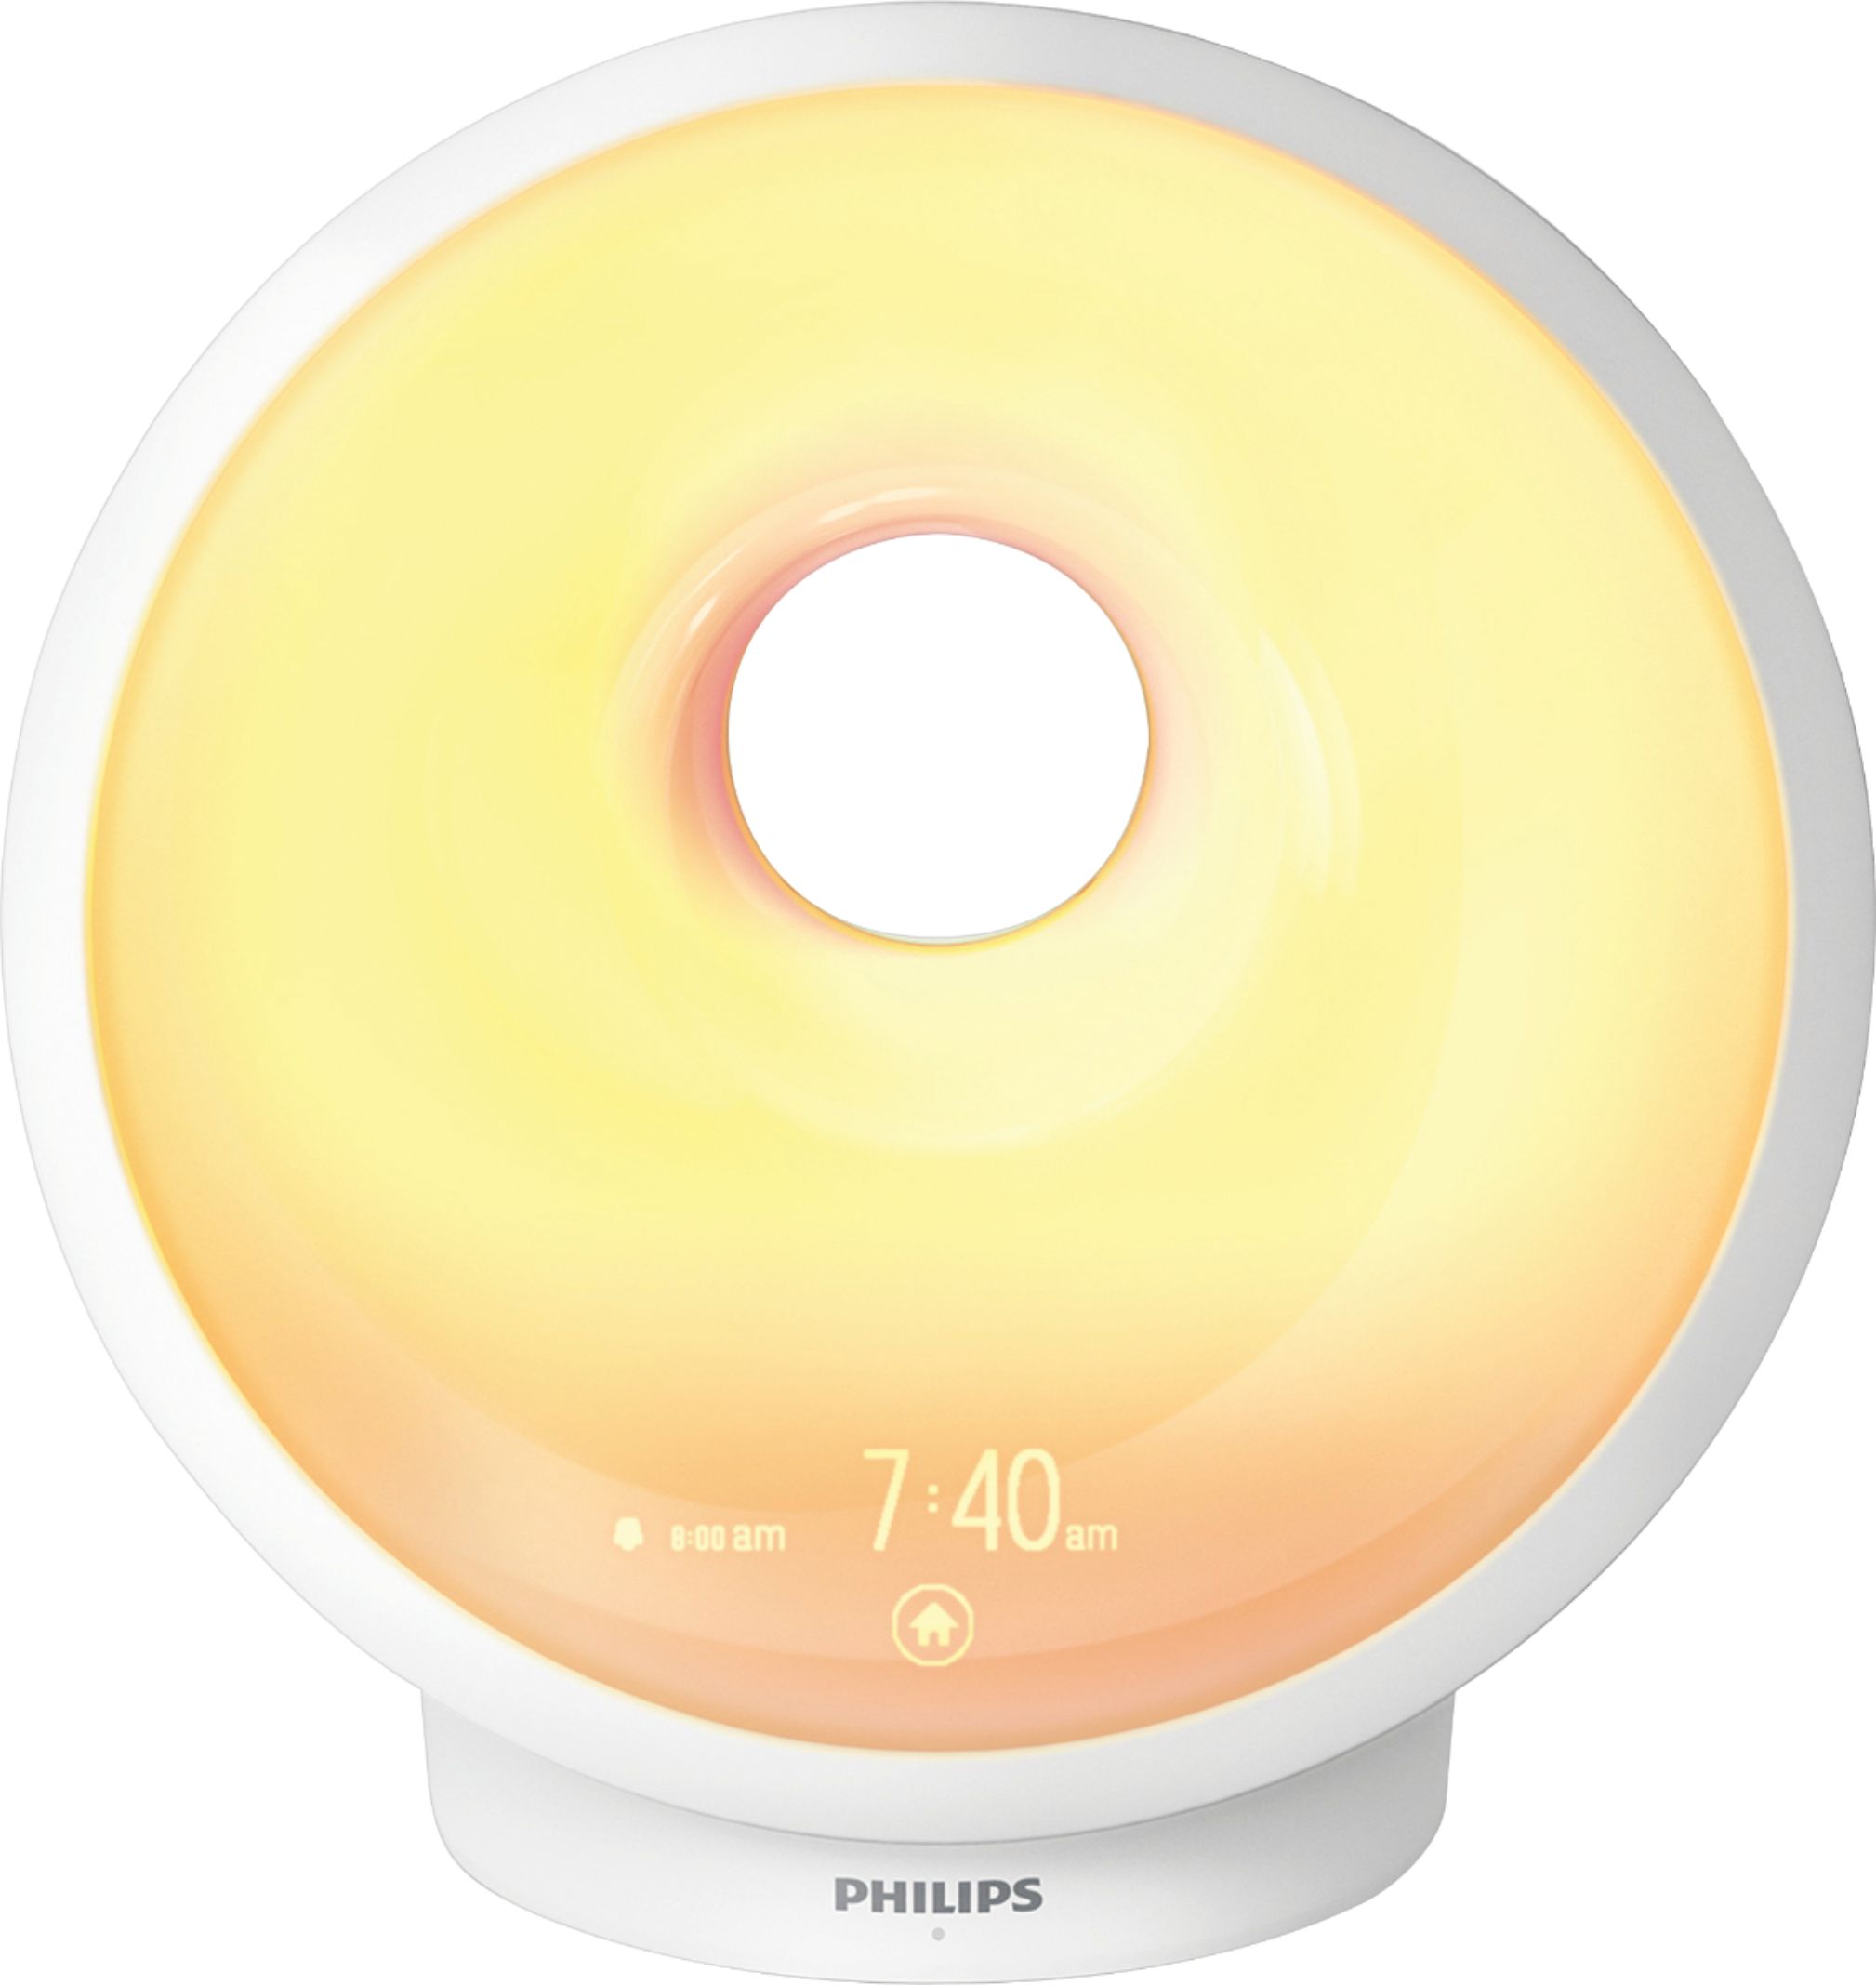 Philips and Wake Up Light Therapy Lamp White HF3650/60 Best